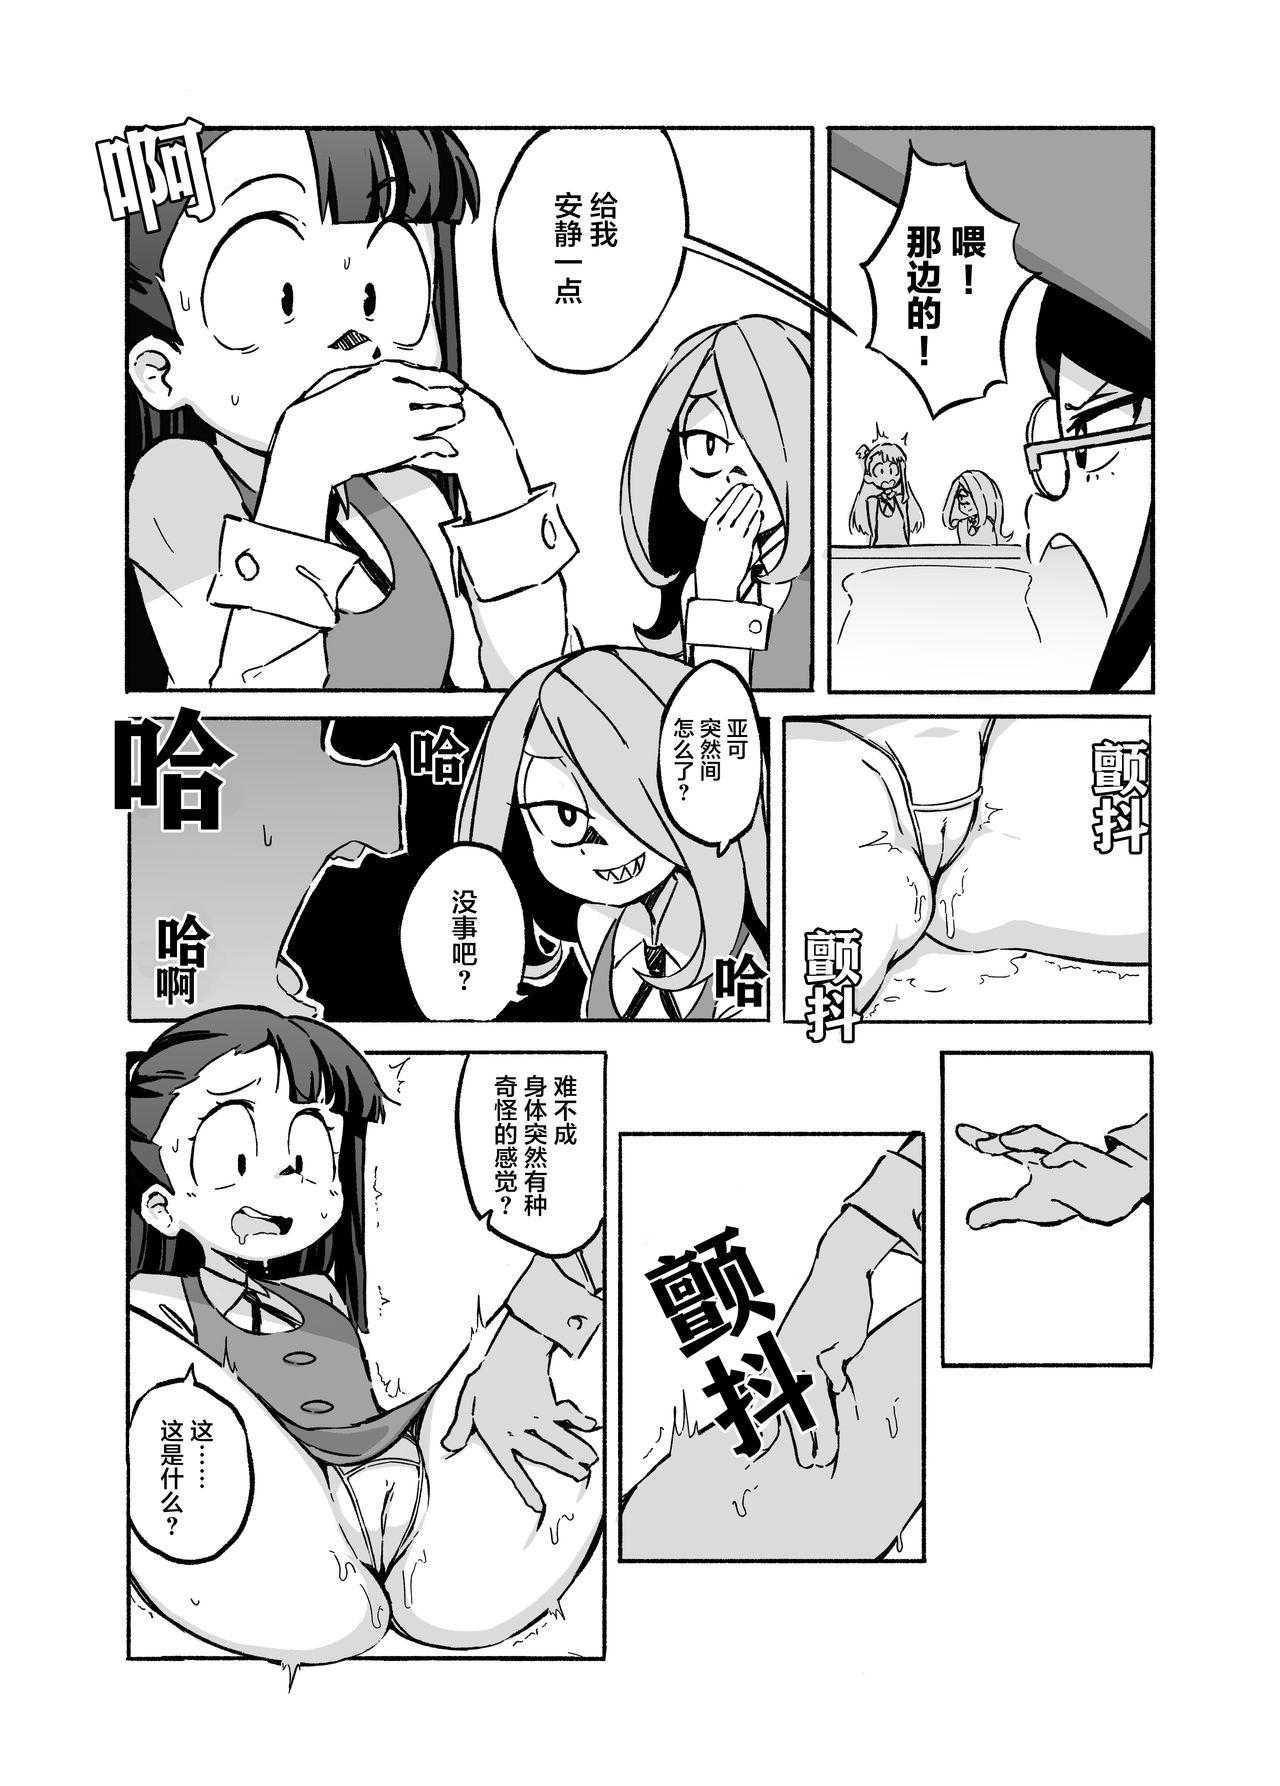 Naked Sluts Mushroom Fever - Little witch academia Mommy - Page 9